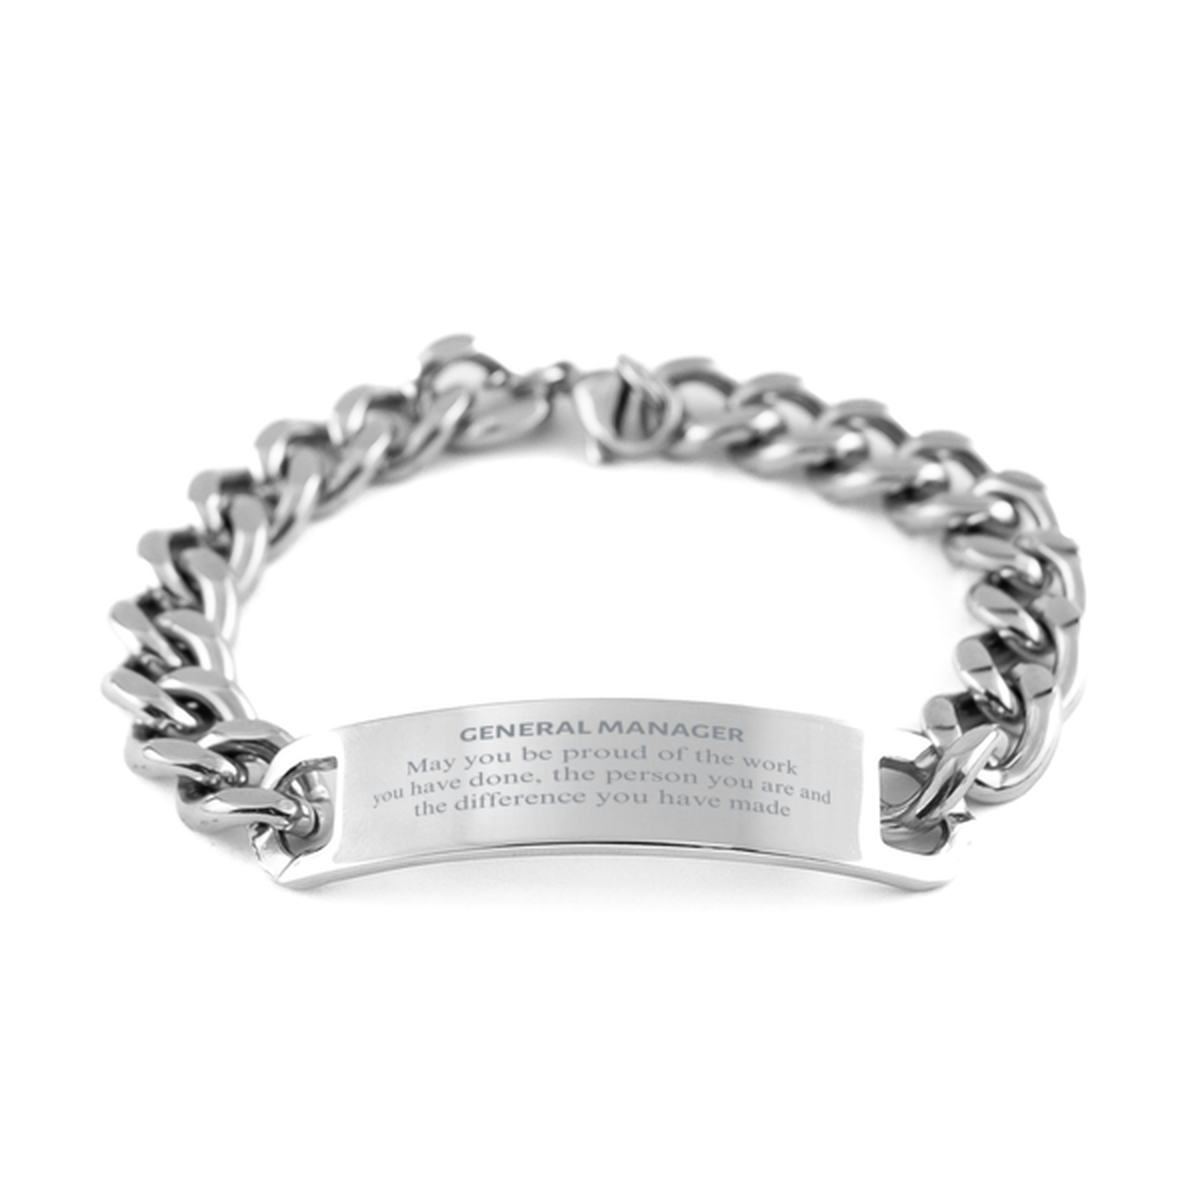 General Manager May you be proud of the work you have done, Retirement General Manager Cuban Chain Stainless Steel Bracelet for Colleague Appreciation Gifts Amazing for General Manager